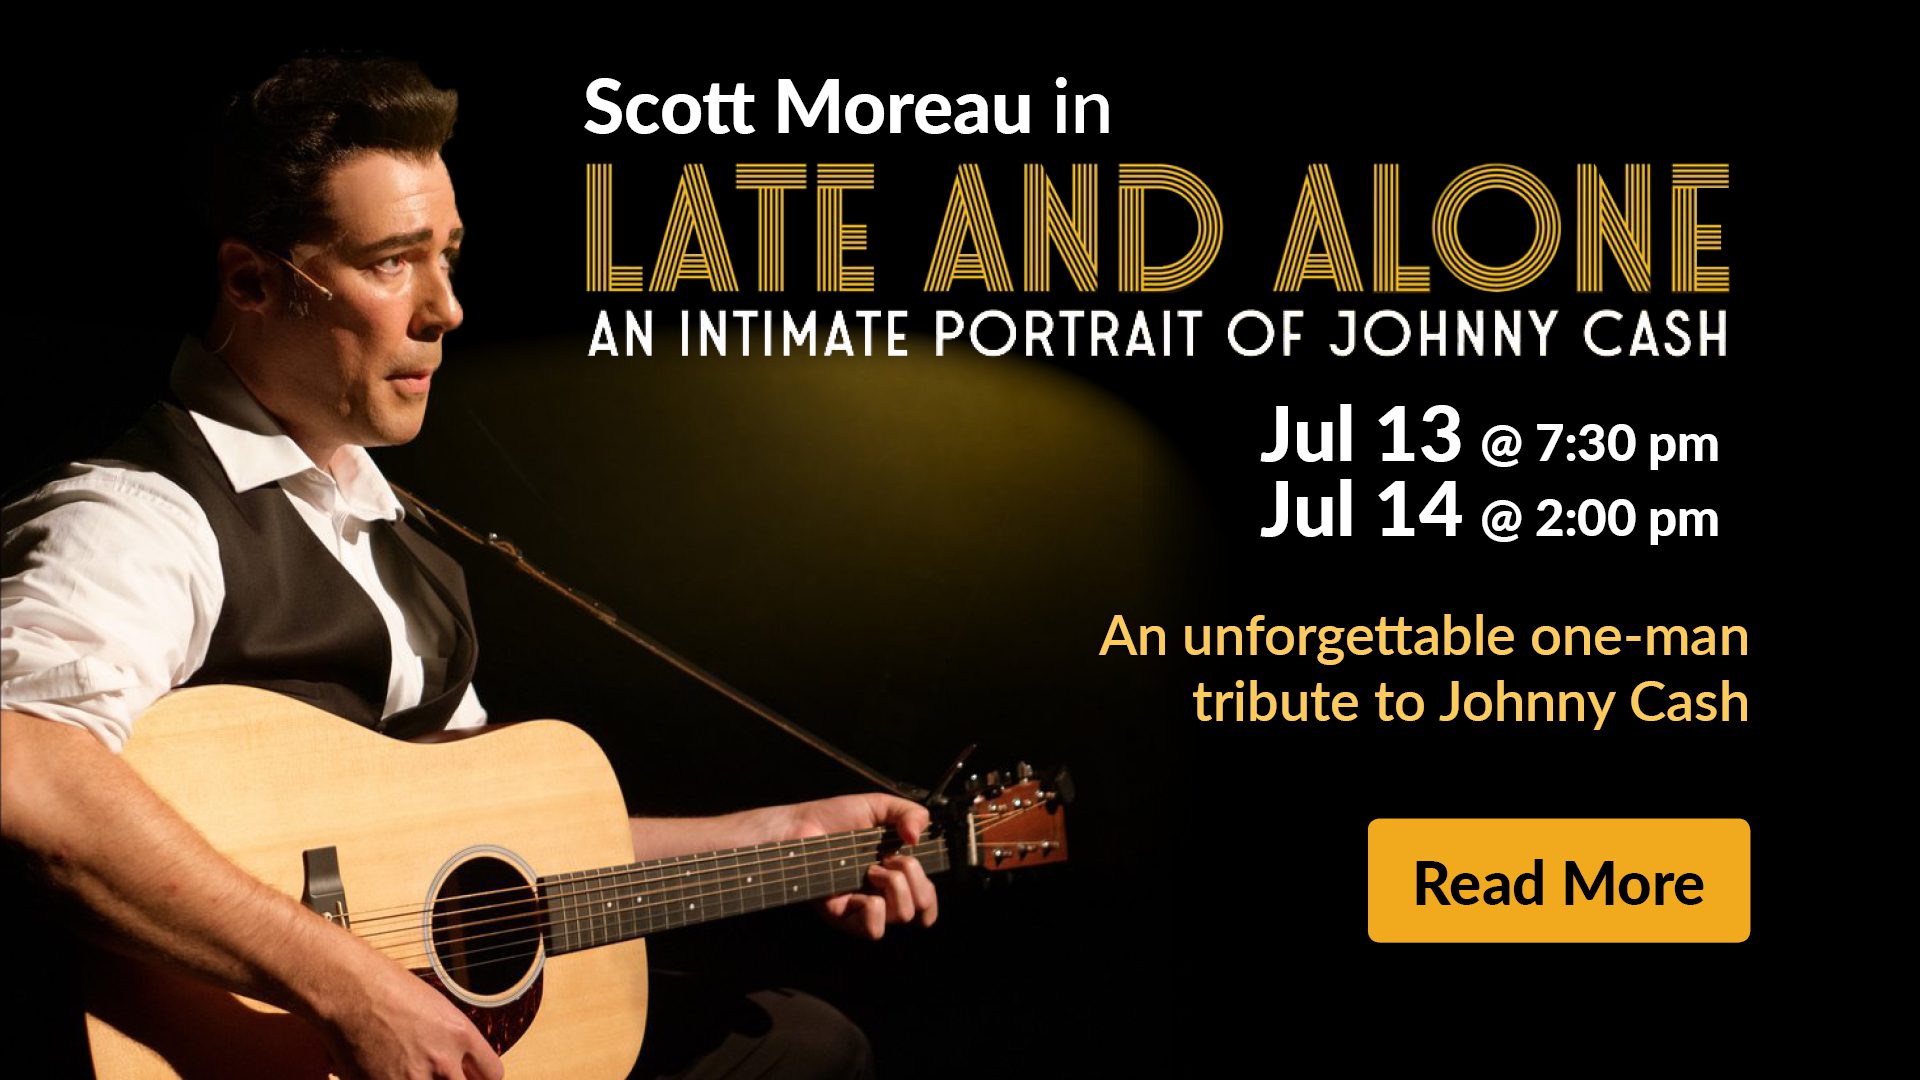 Scott Moreau in Late and Alone: An Intimate Portrait of Johnny Cash | Jul 13-14